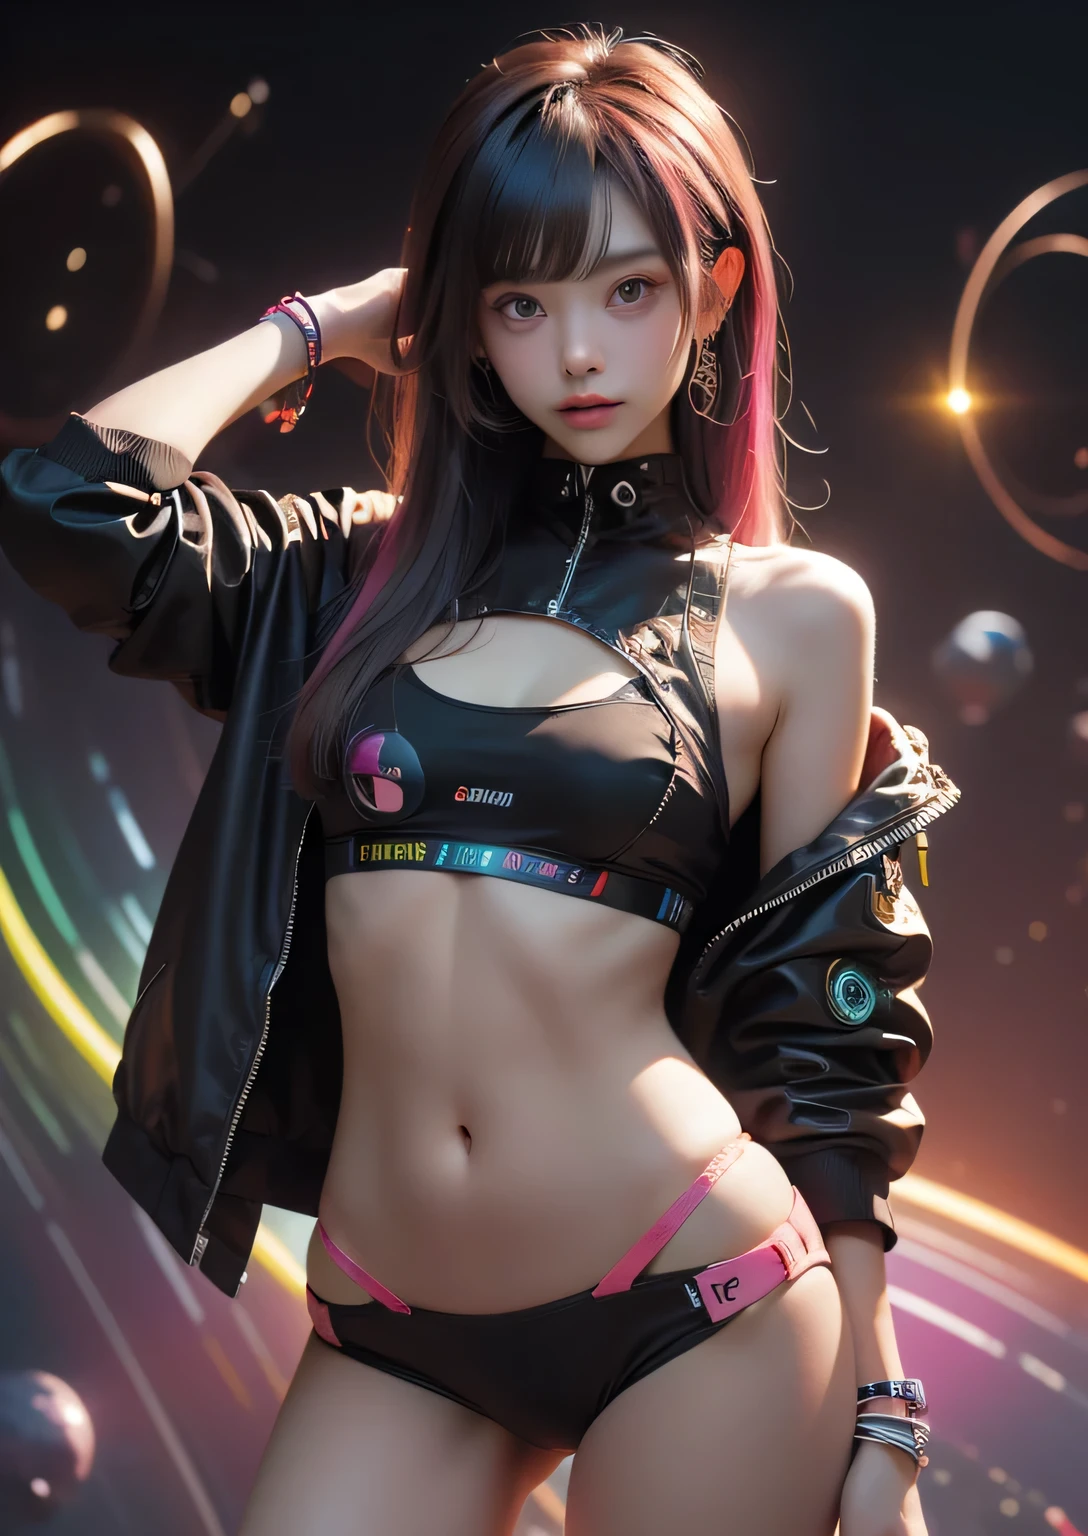 (masterpiece, highest quality, highest quality, Official Art, beautifully、aesthetic:1.2)、West Shot Photo、 (Cyberpunk fashion beautiful girl 1 person)、Big iridescent eyes、Beautiful skin、Beautiful belly、Expressionlesoderate breast size、（Pink and blue long hair with bangs）、Very detailed,(Neon colored space background:1.3)、Perfect lighting、Sharp focus、High resolution、High resolution、High color rendering、High resolution、Super realistic、